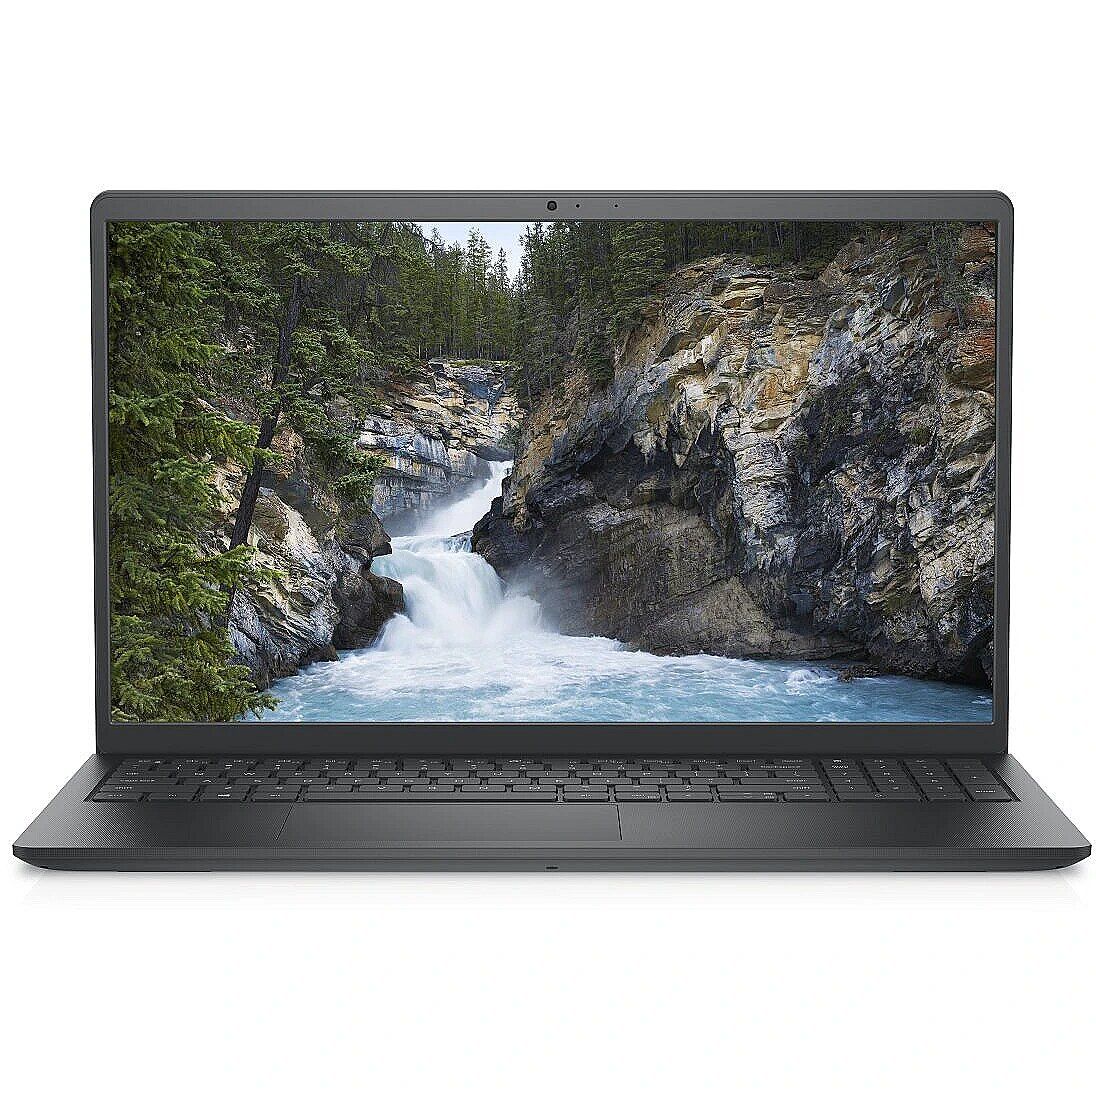 Laptop Dell Vostro 3530, 15.6 inch FHD (1920 x 1080) 120Hz 250 nits WVA Anti- Glare LED Backlit Narrow Border Display, Carbon Black Palmrest without Finger Print Reader, Carbon Black, 13th Generation Intel Core i3-1305U (10 MB cache, 5 cores, 6 threads, up to 4.50 GHz), Intel(R) UHD Graphics, 8GB_3